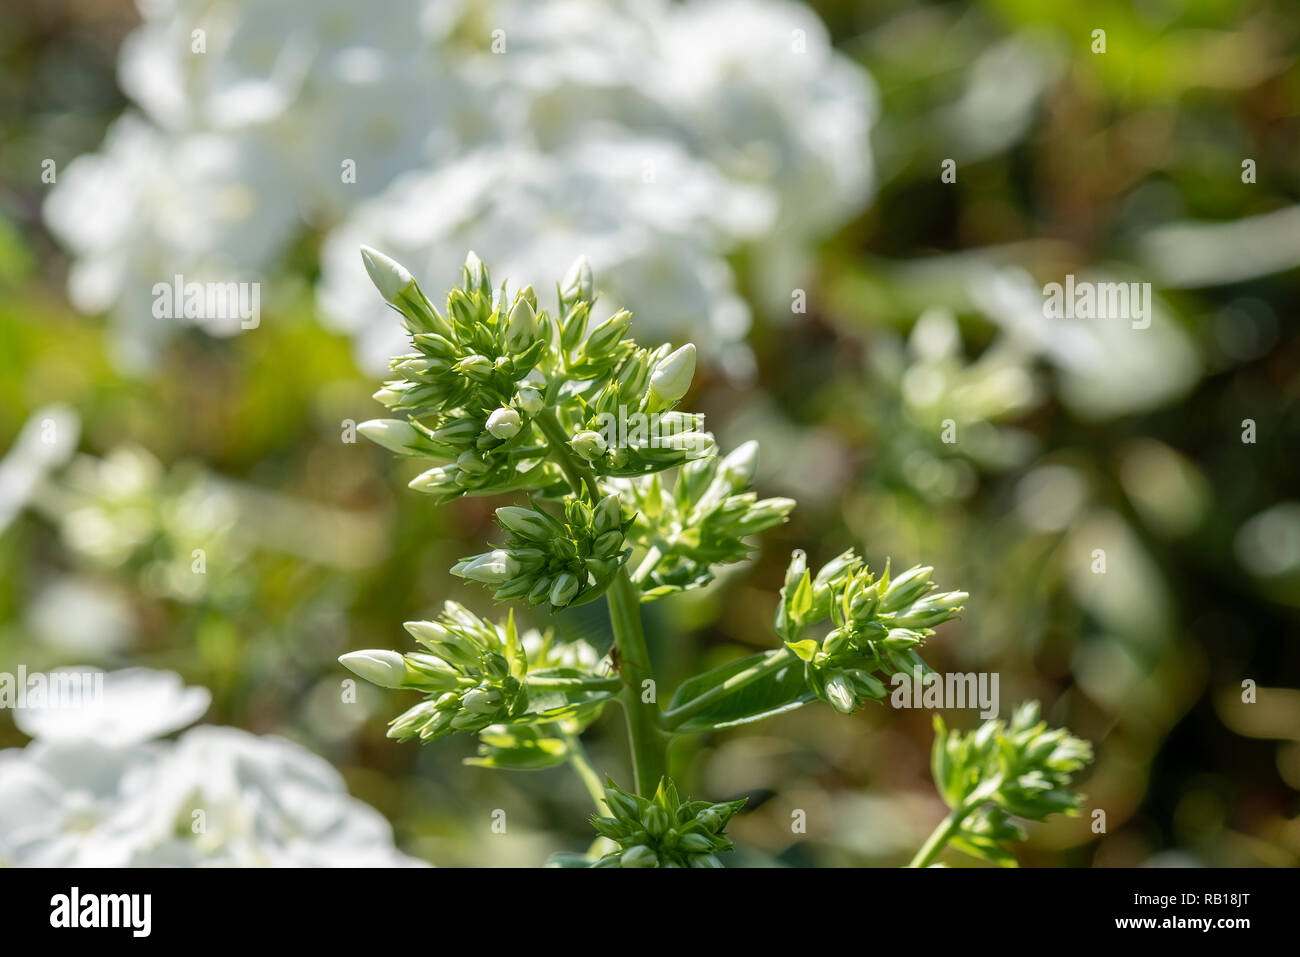 Color outdoor nature image of a stem full of phlox buds in front of white phlox blossoms on a natural green blurred background,bright sunny summer Stock Photo